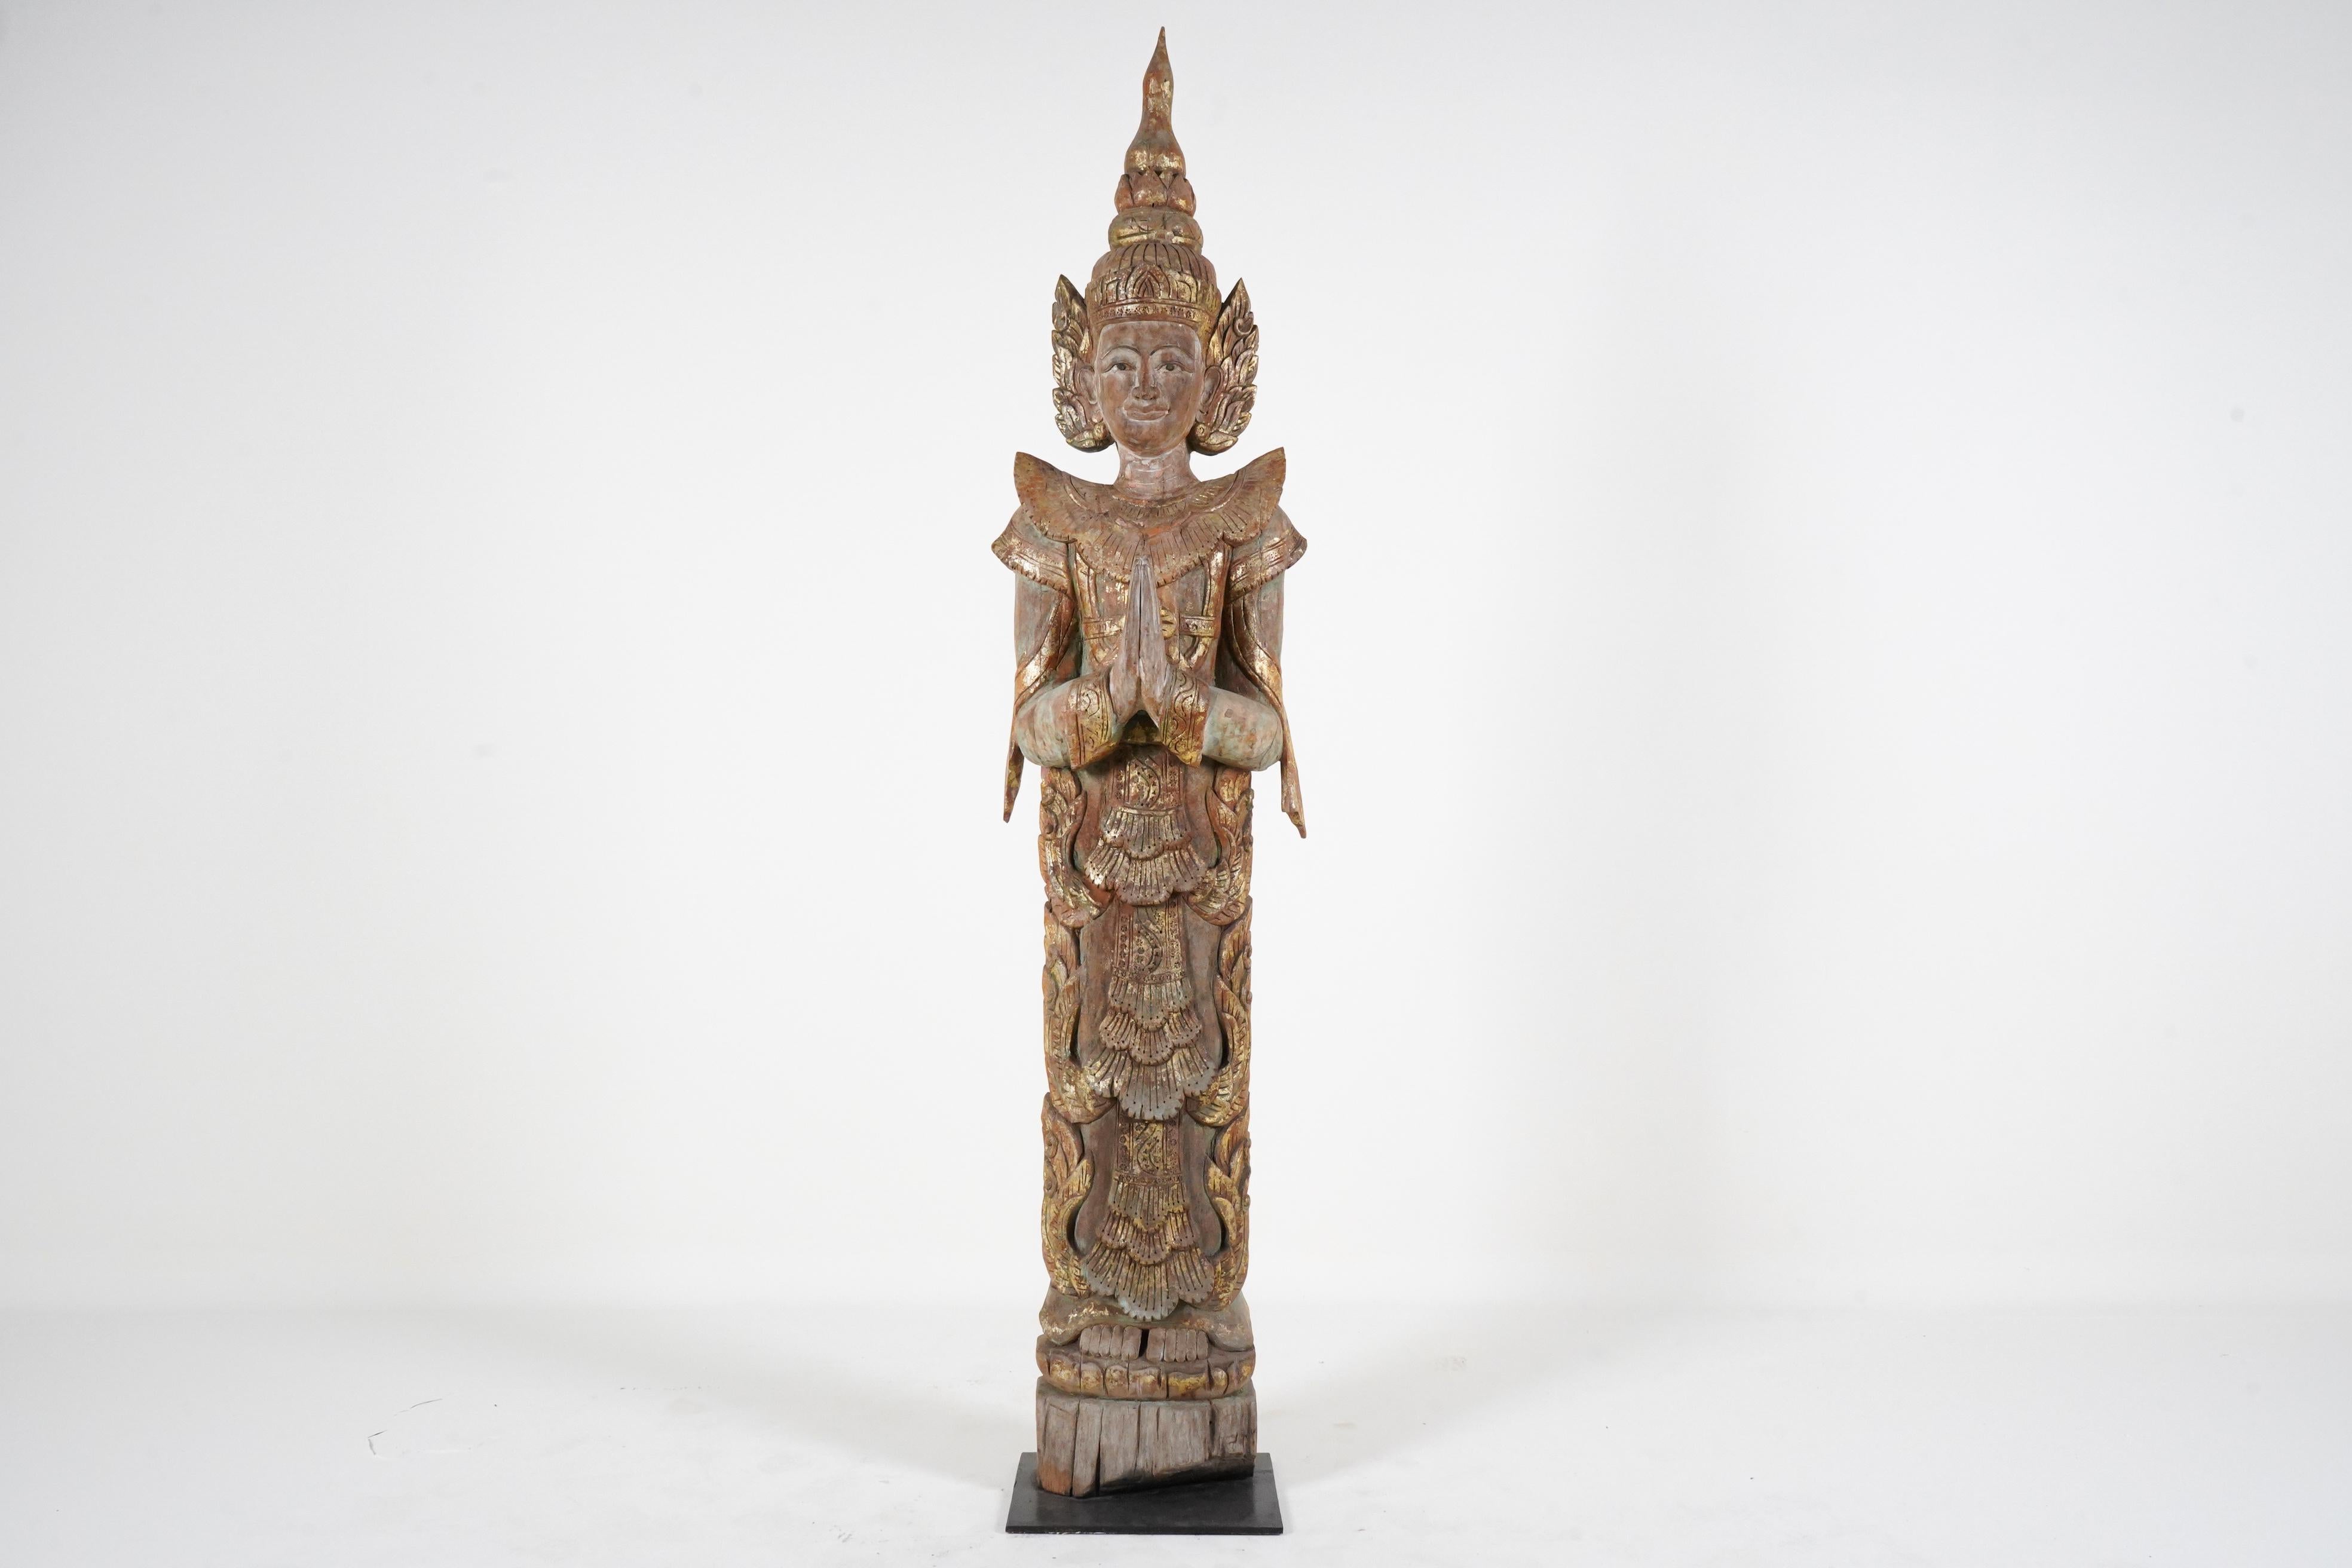 Thai temples often contained various kinds of carved figures including Buddhas, apostles and angels. This large greeting angel is based on sculptures that typically flanked altars or entrances. Thai Buddhists, like members of other faiths, believe